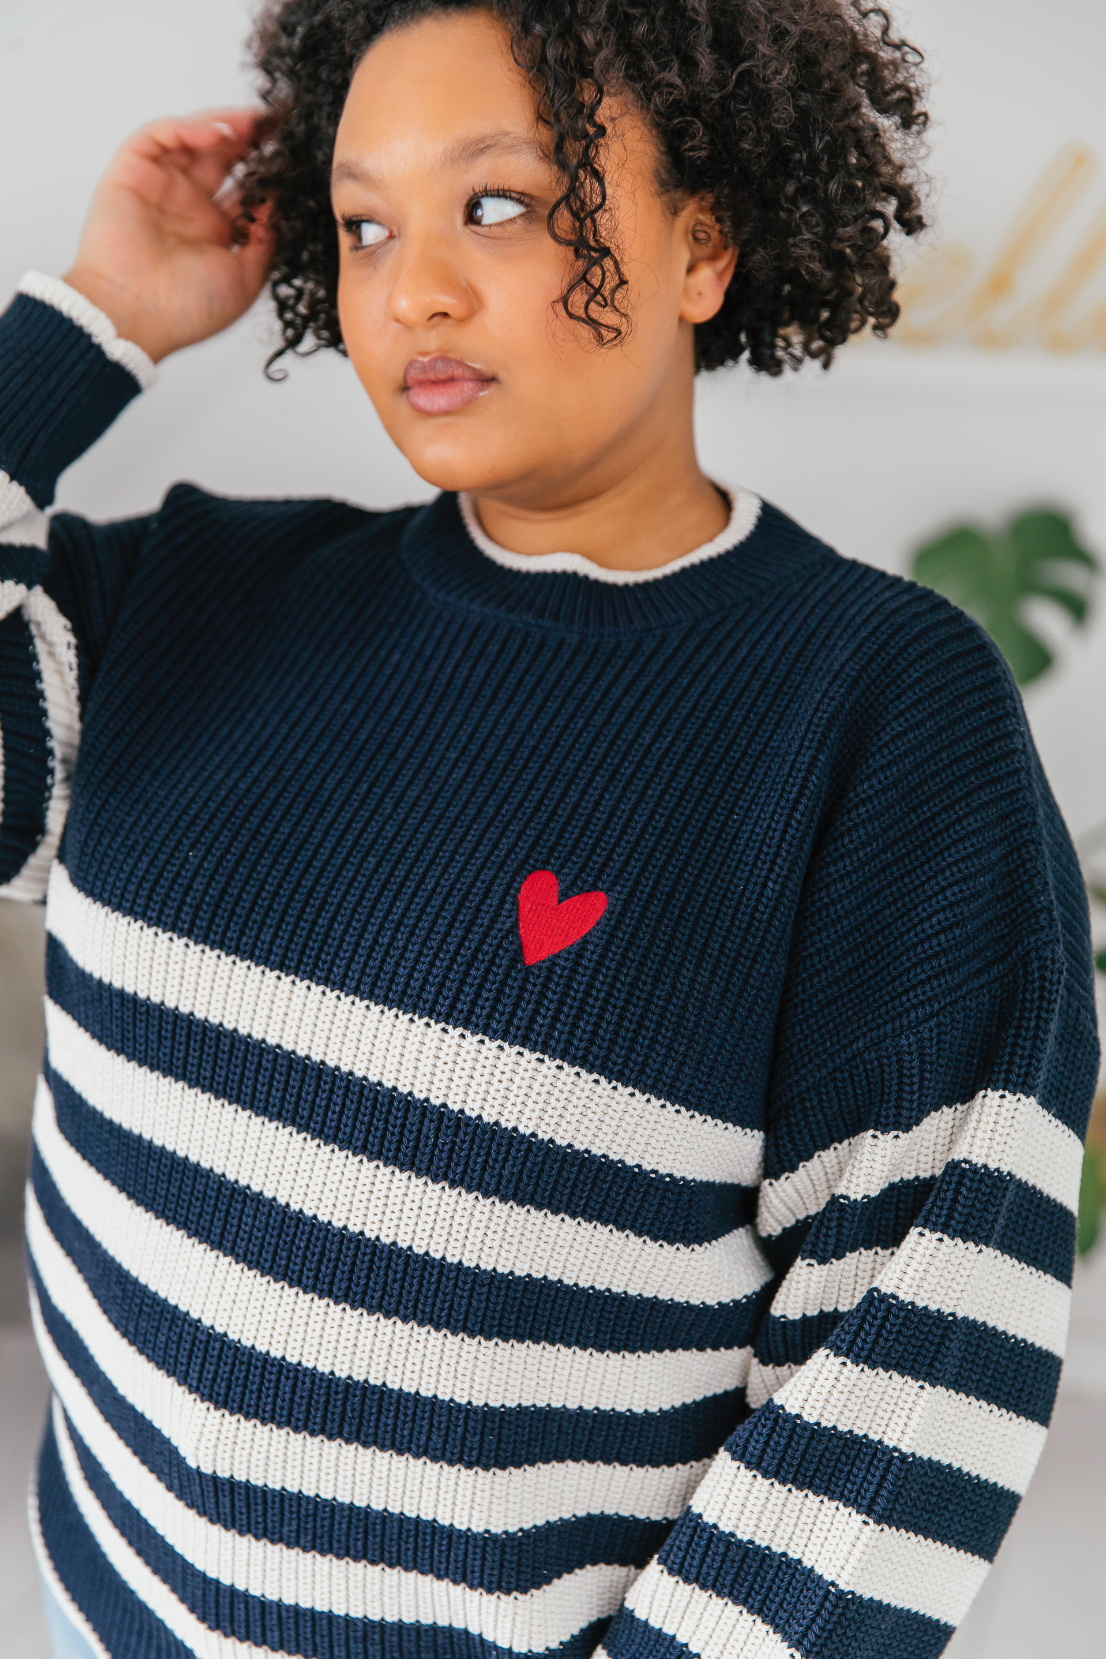 O&F Stripe Jumper with Heart Embroidery